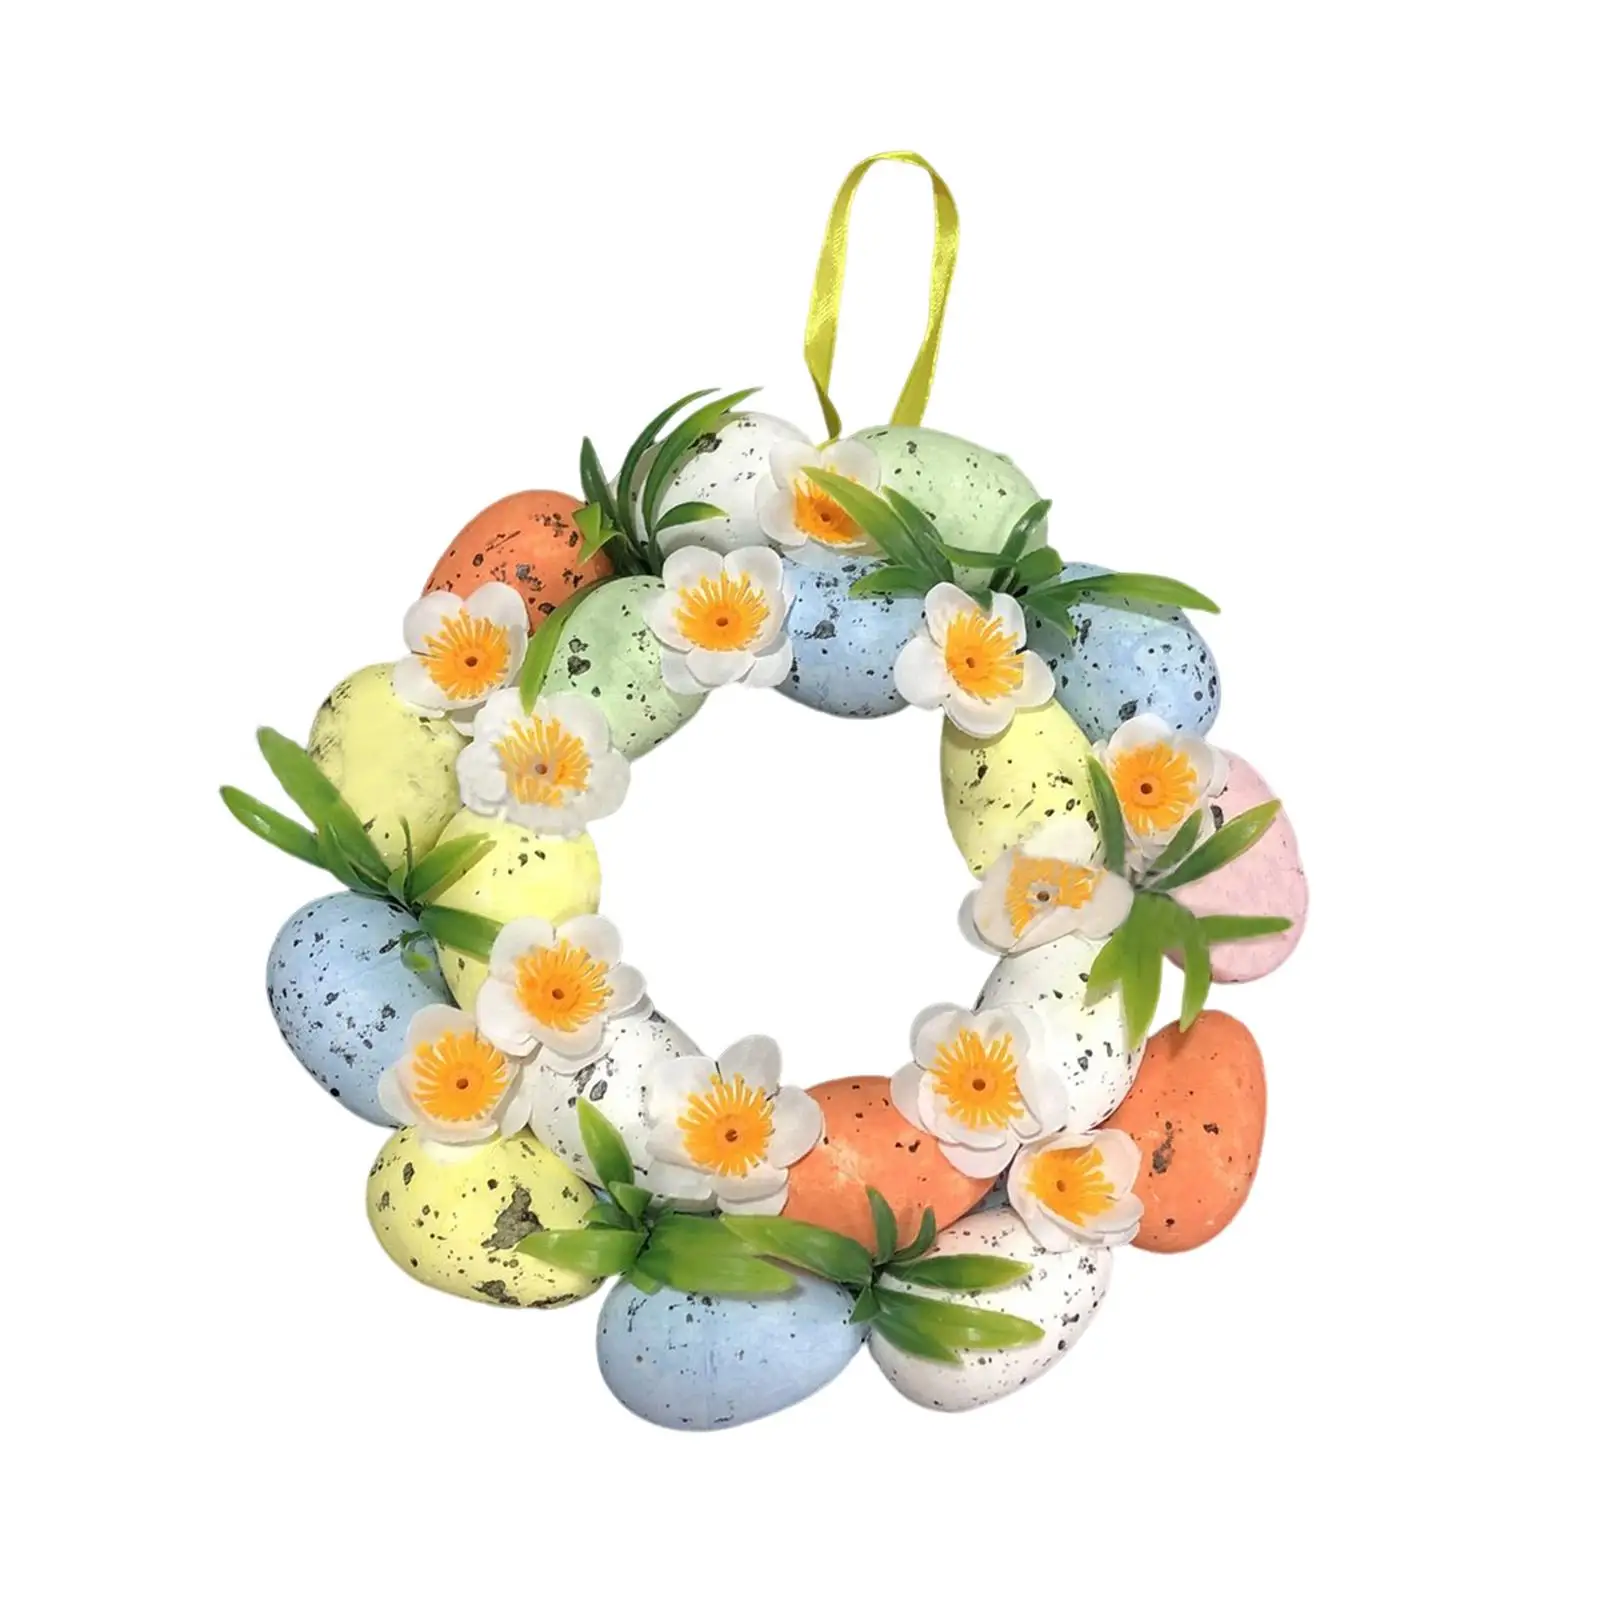 7.87inch Easter Wreath Holiday Decor with Colorful Egg Artificial Flowers Wreaths for Outside Festive Spring Summer Home Party